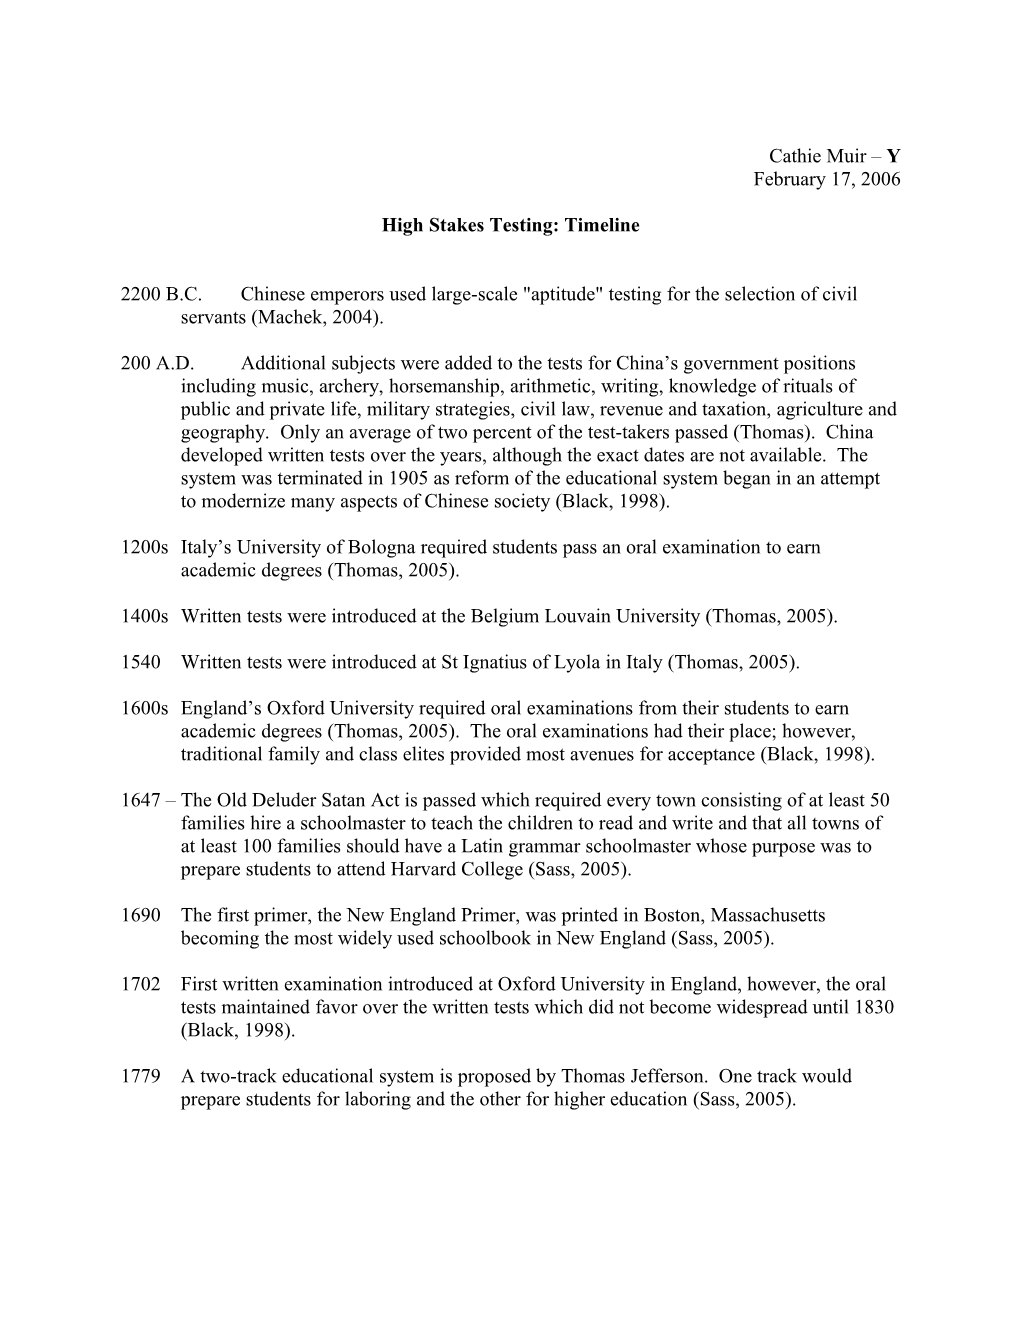 High Stakes Testing: Timeline